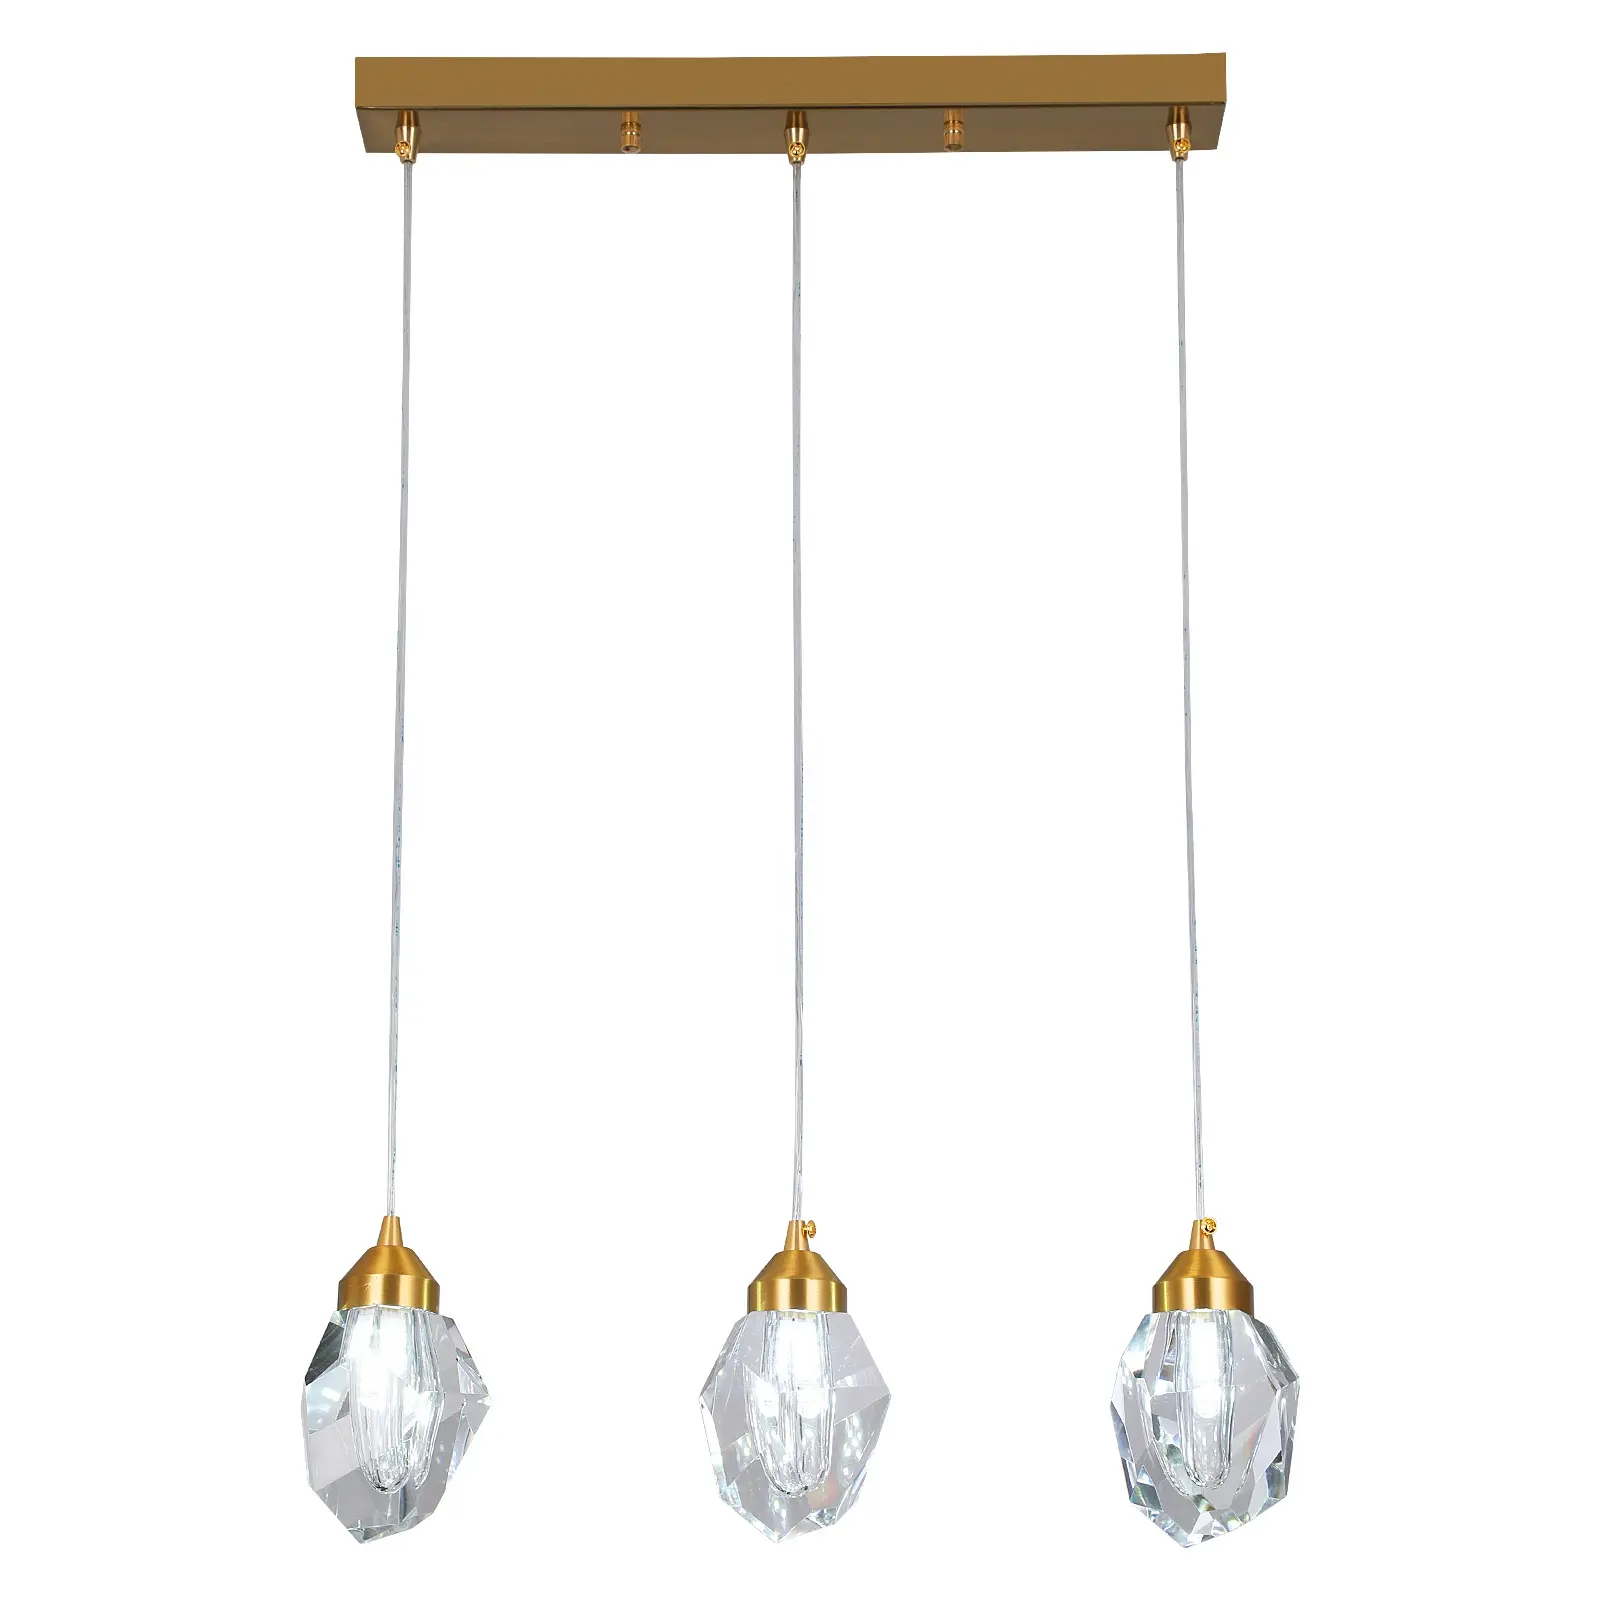 G9 LED 3 Heads High Quality Warm White Hanging Kitchen Lighting Modern Chandelier For Home